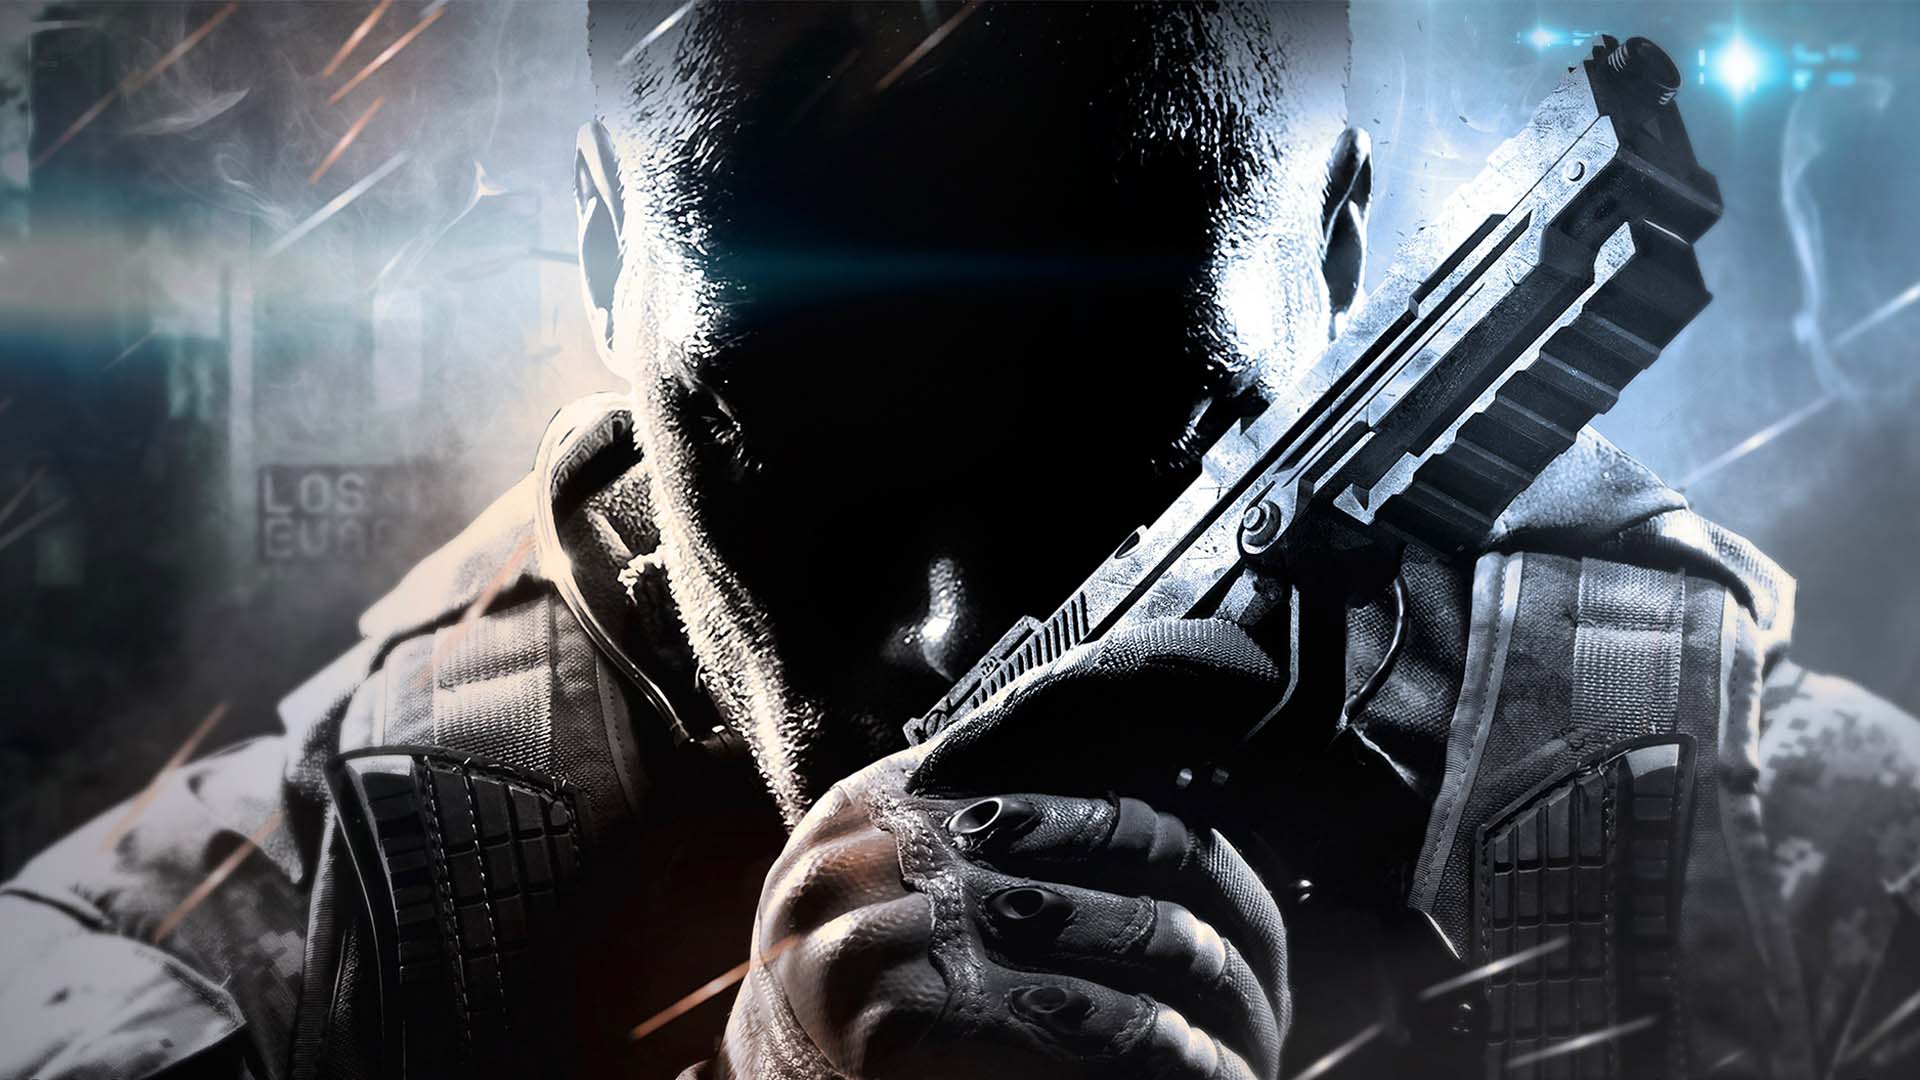 Download Call Of Duty Ghost Free Hd 1080p Wallpaper Full Size